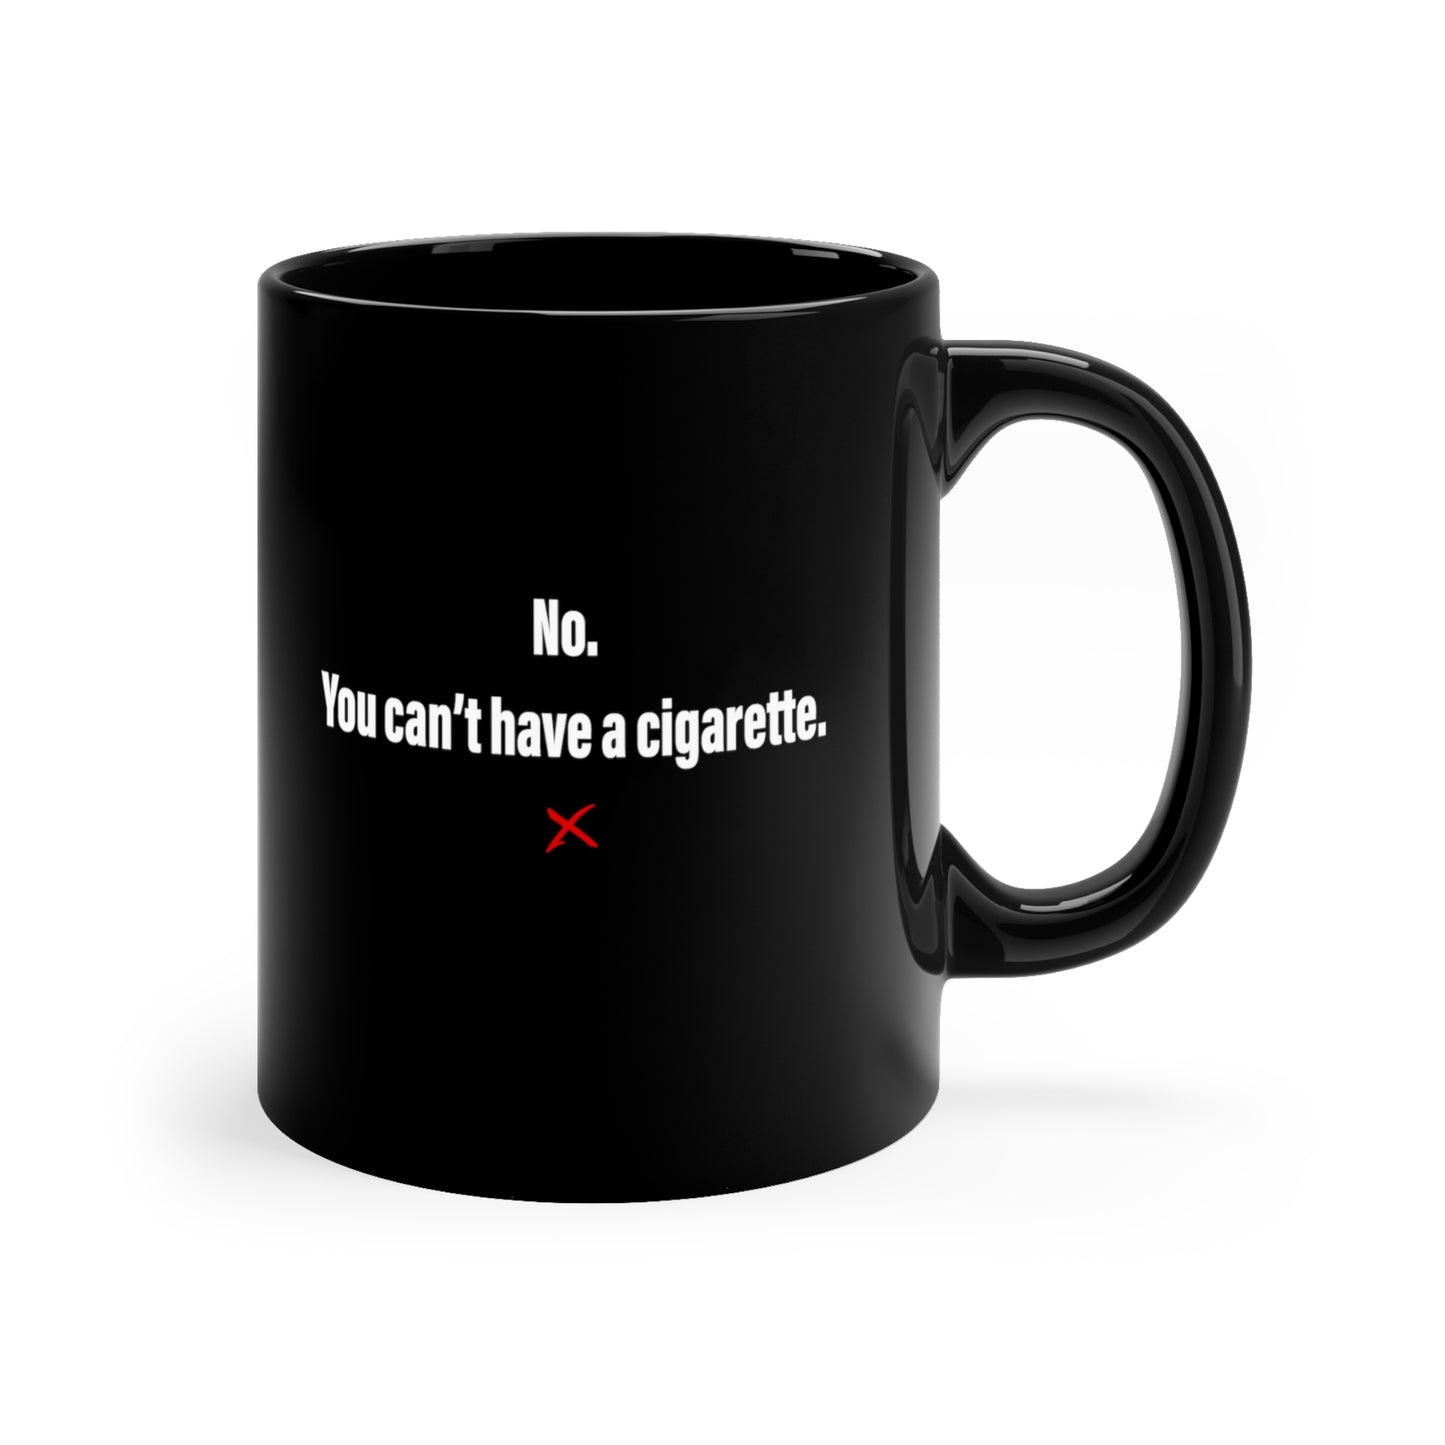 No. You can't have a cigarette. - Mug